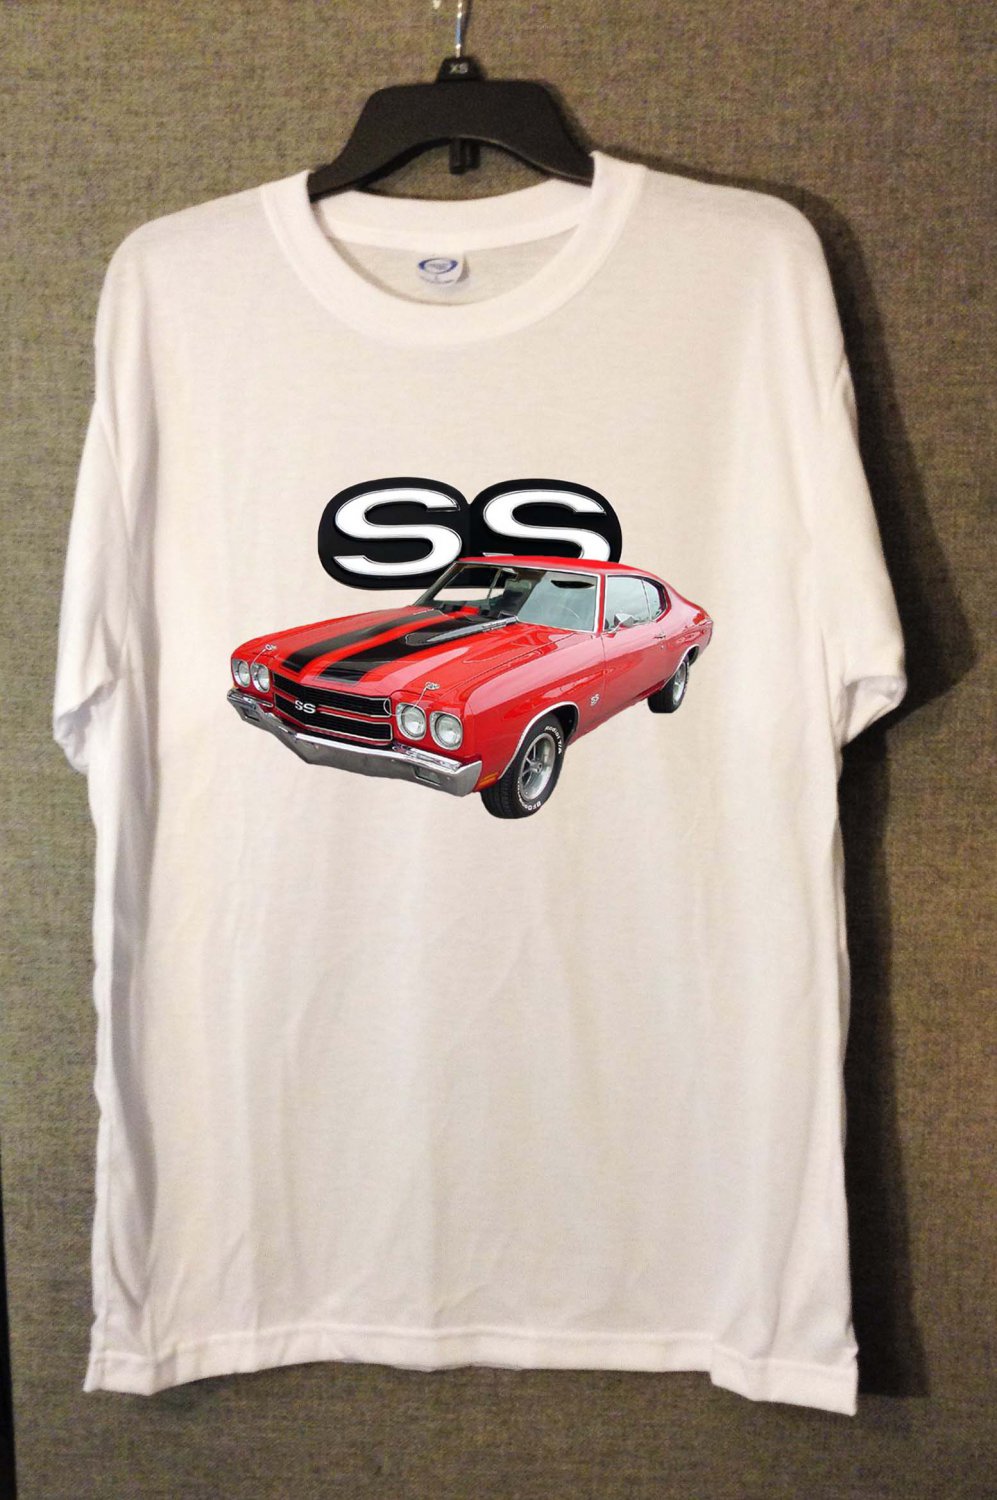 New 1970 Chevy Chevelle Red with Black Stripe white T-shirt  (Large)